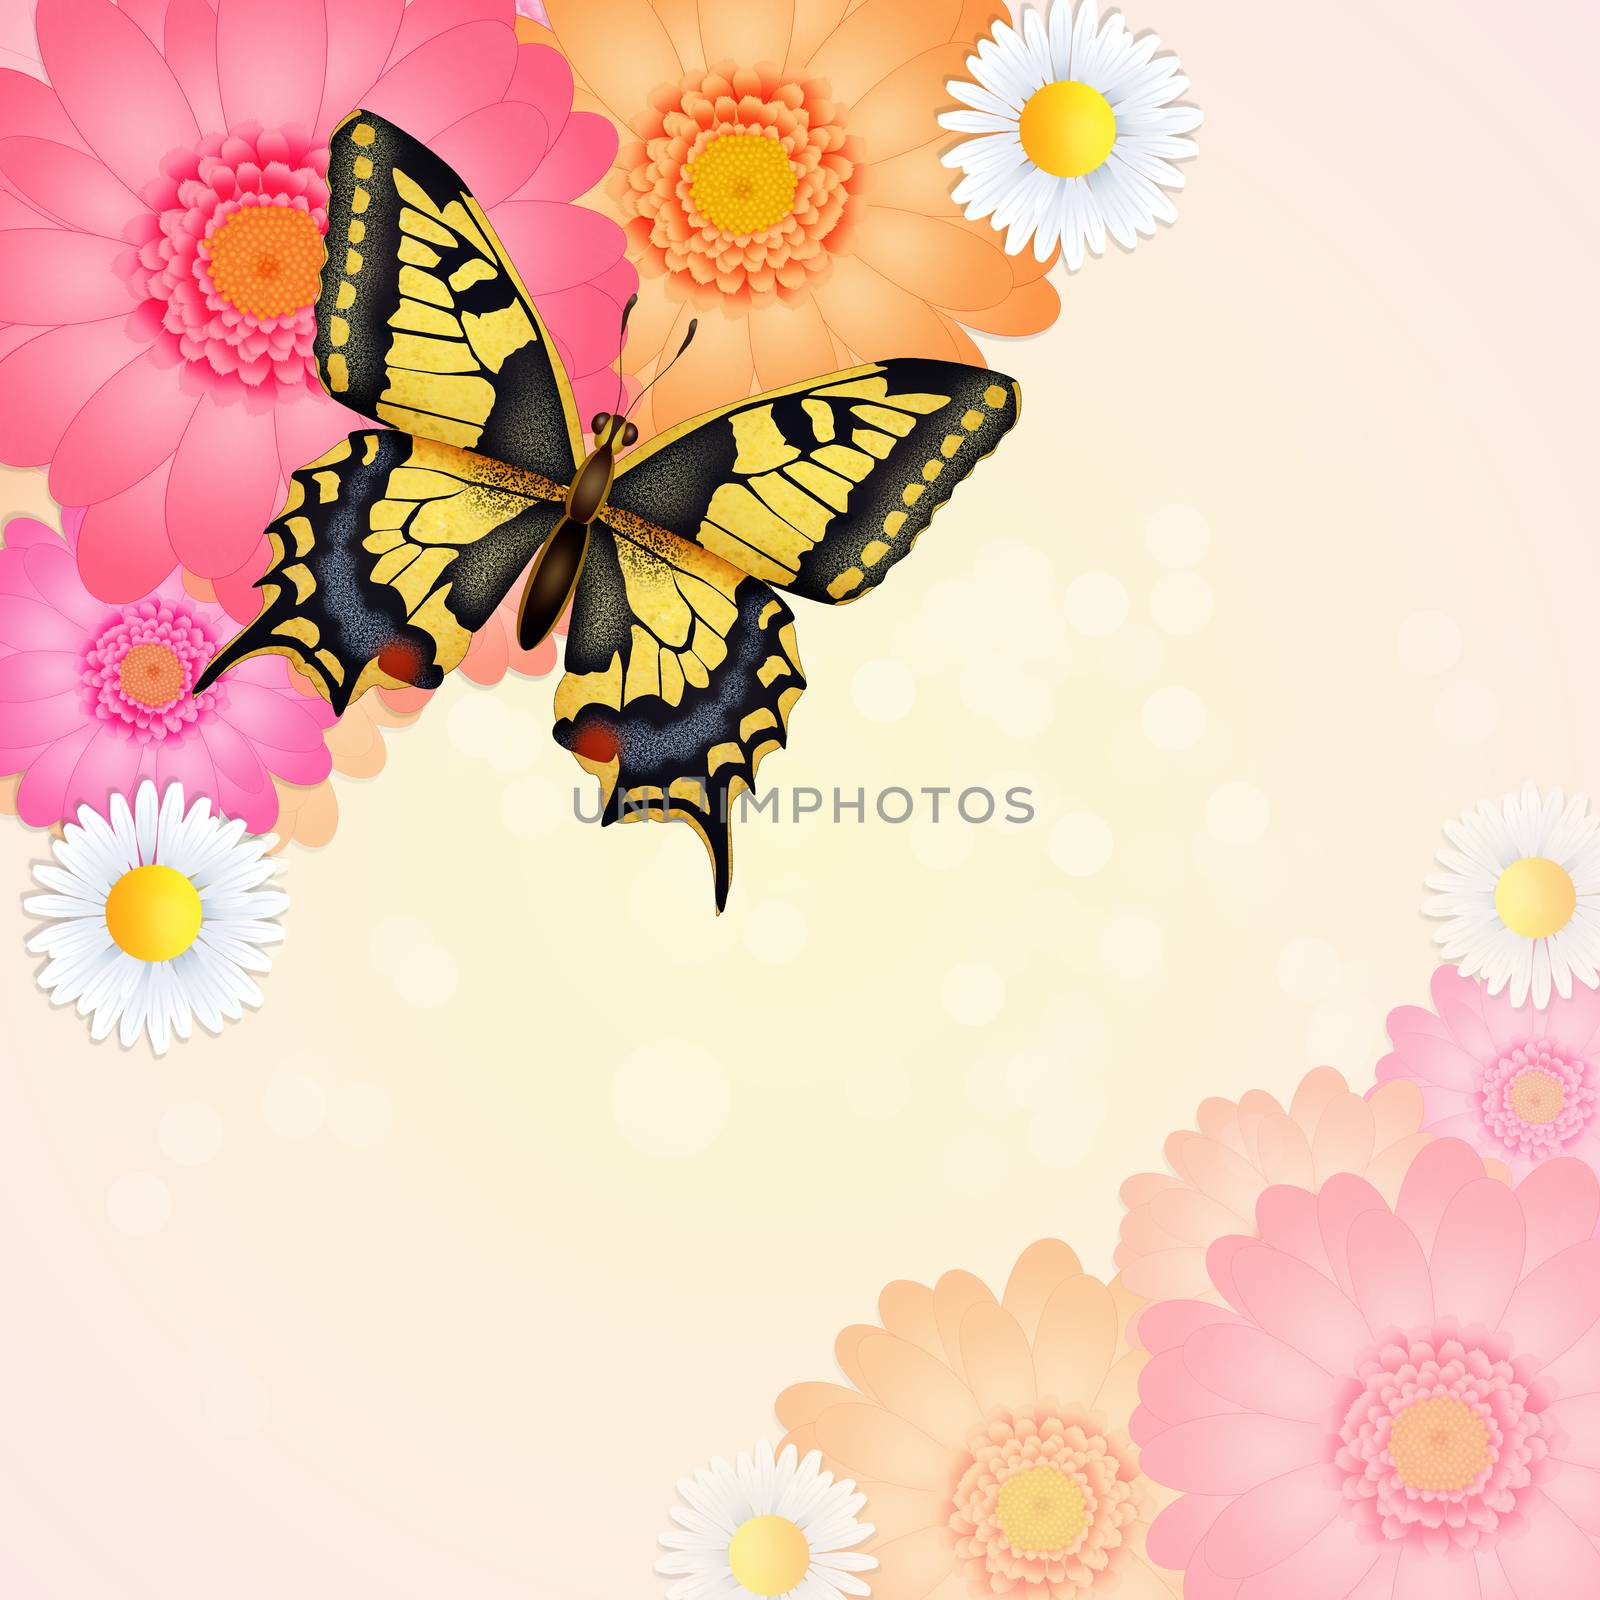 the swallowtail  on flowers by adrenalina